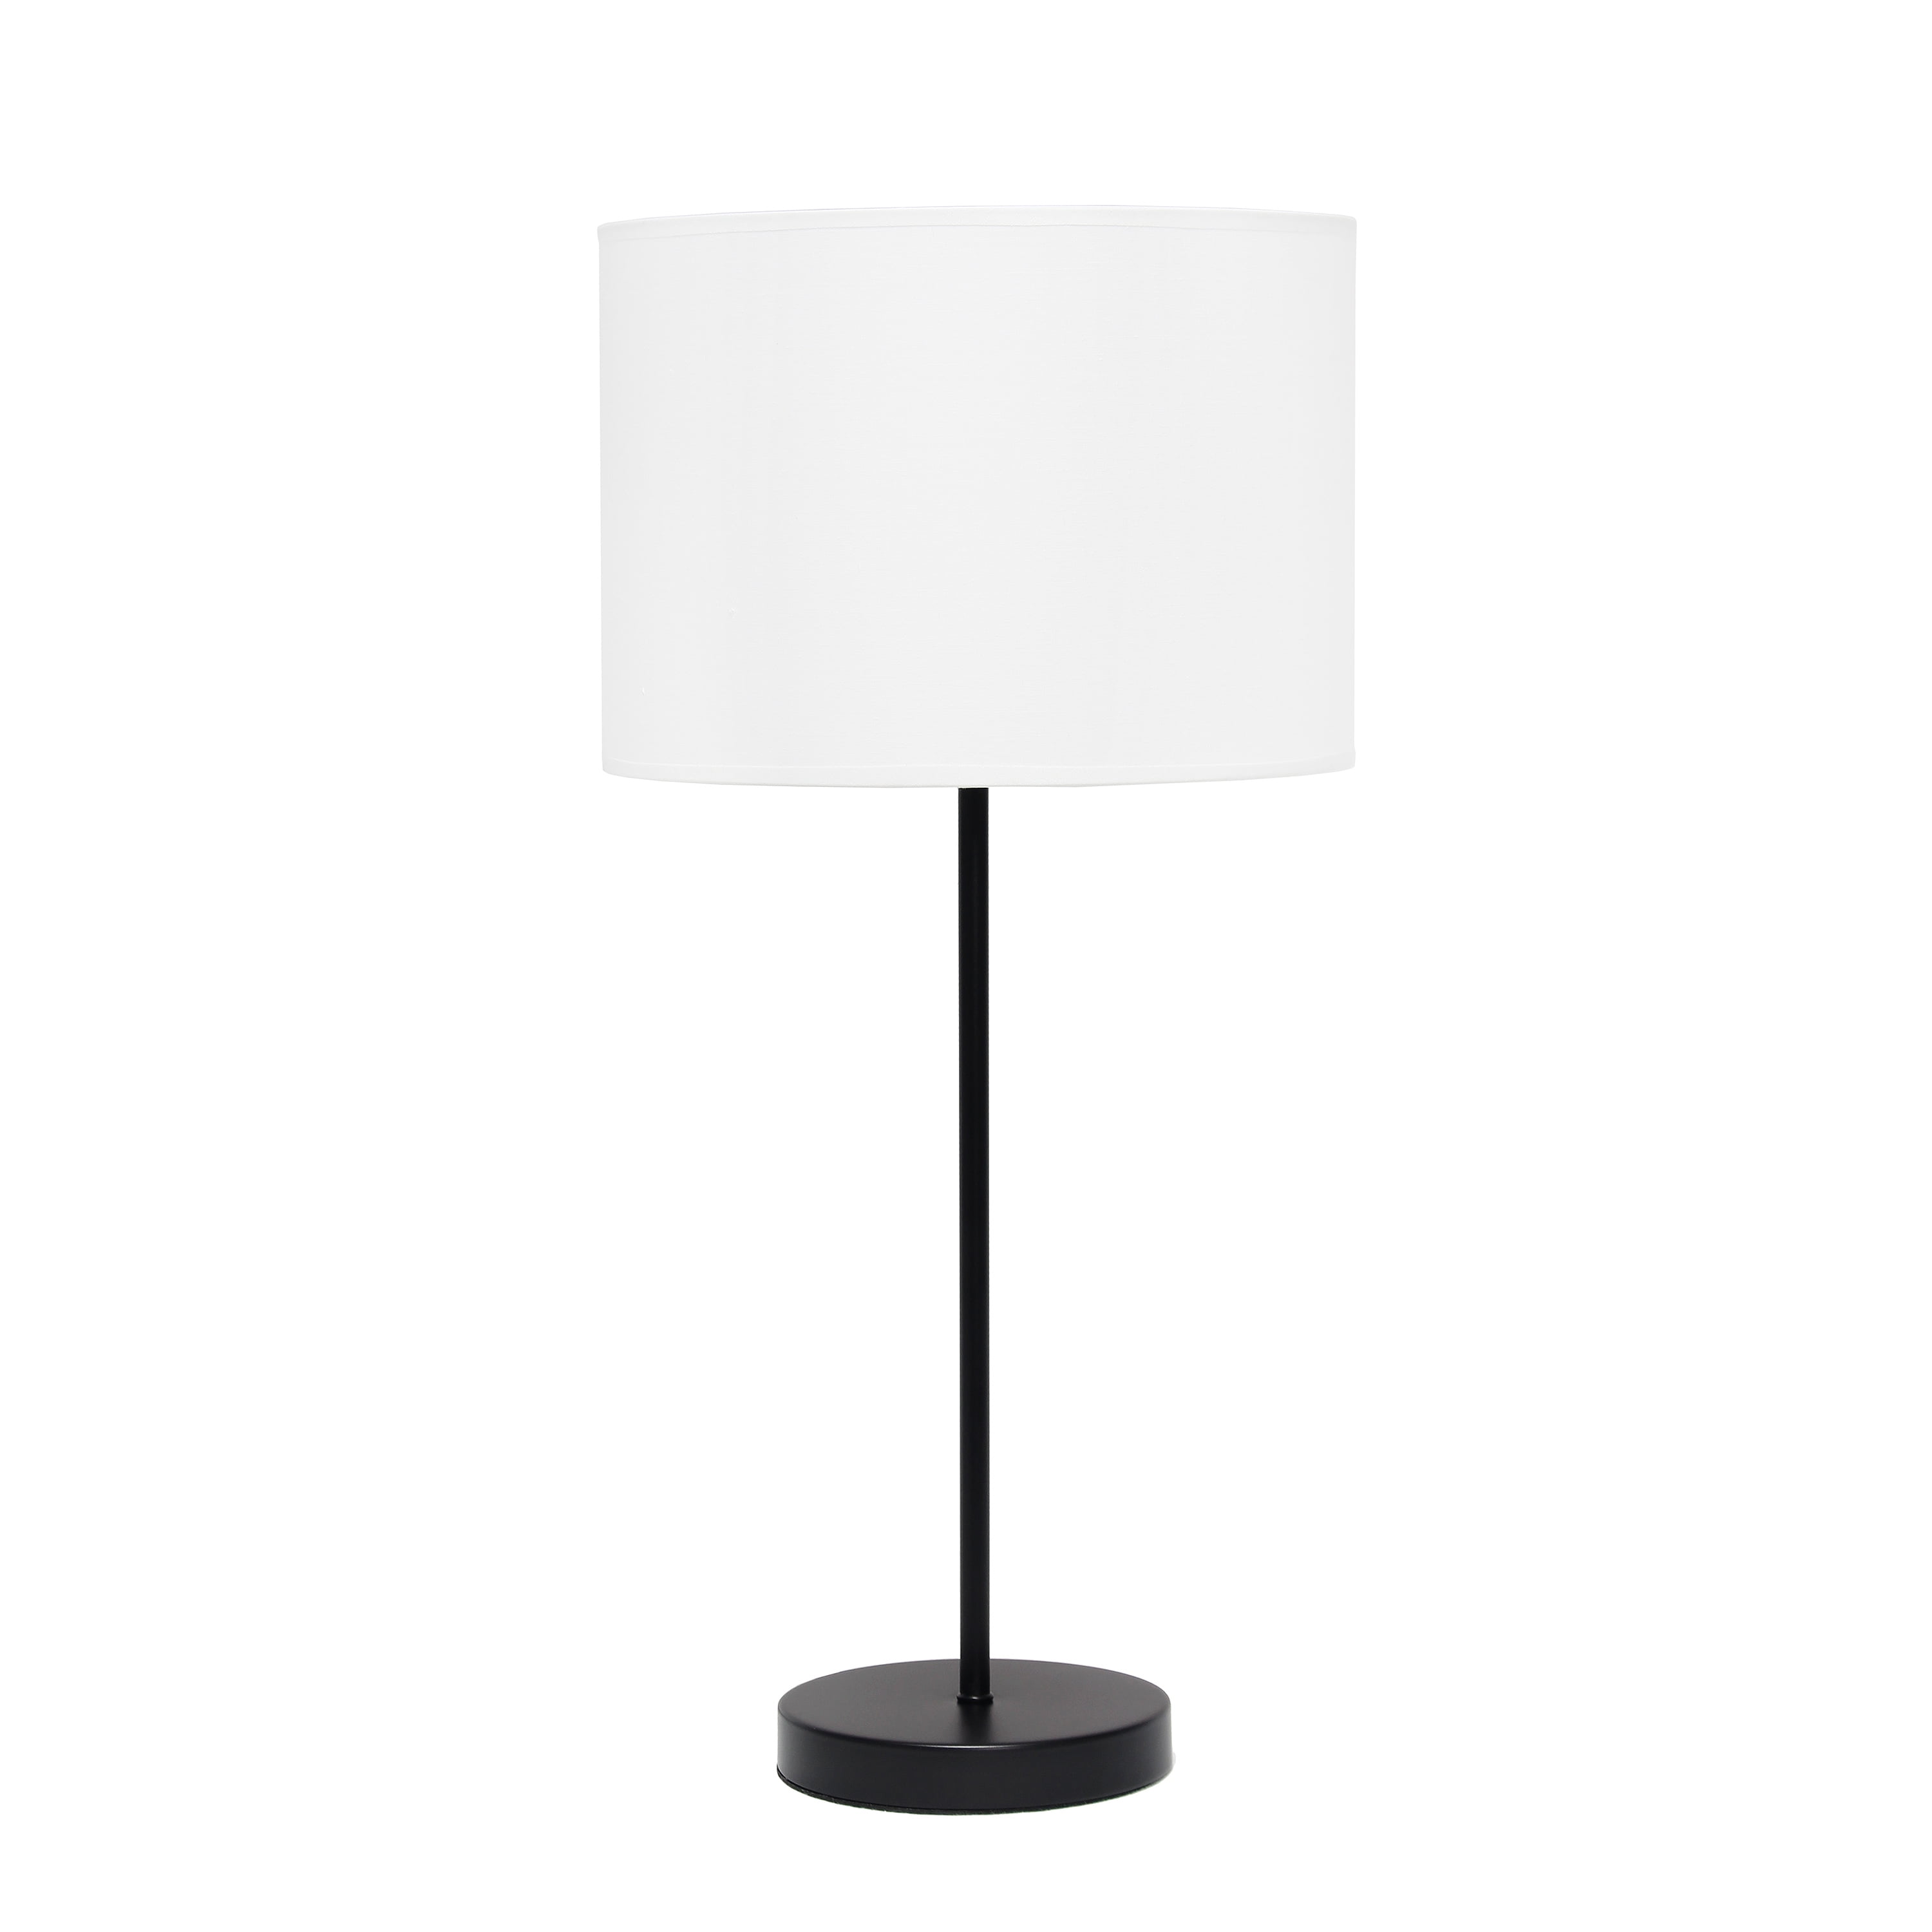 Lt2040-baw Black Stick Table Lamp With Fabric Shade, White